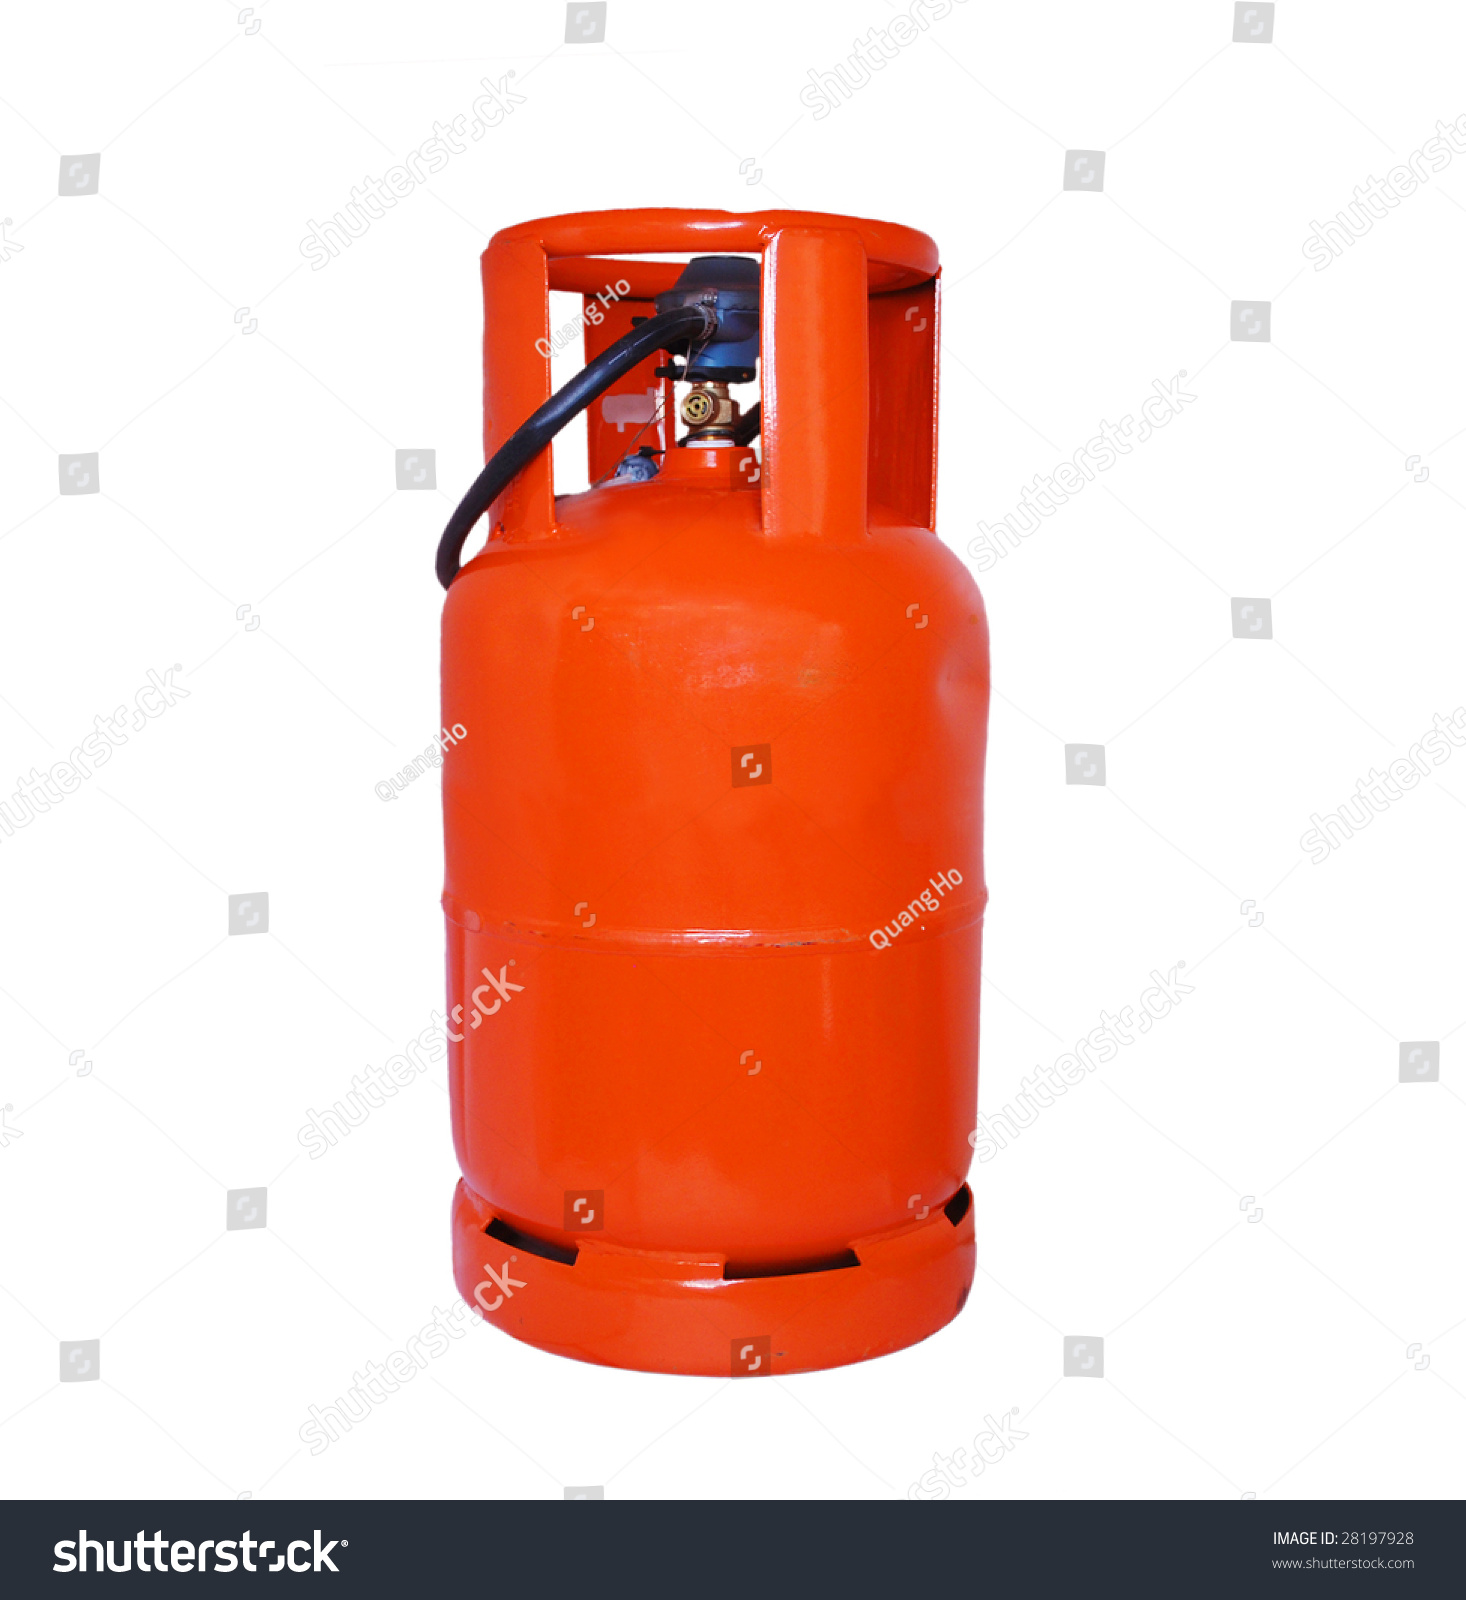 Use a portable tank to fill car ? - Natural Gas Vehicle Owner Community